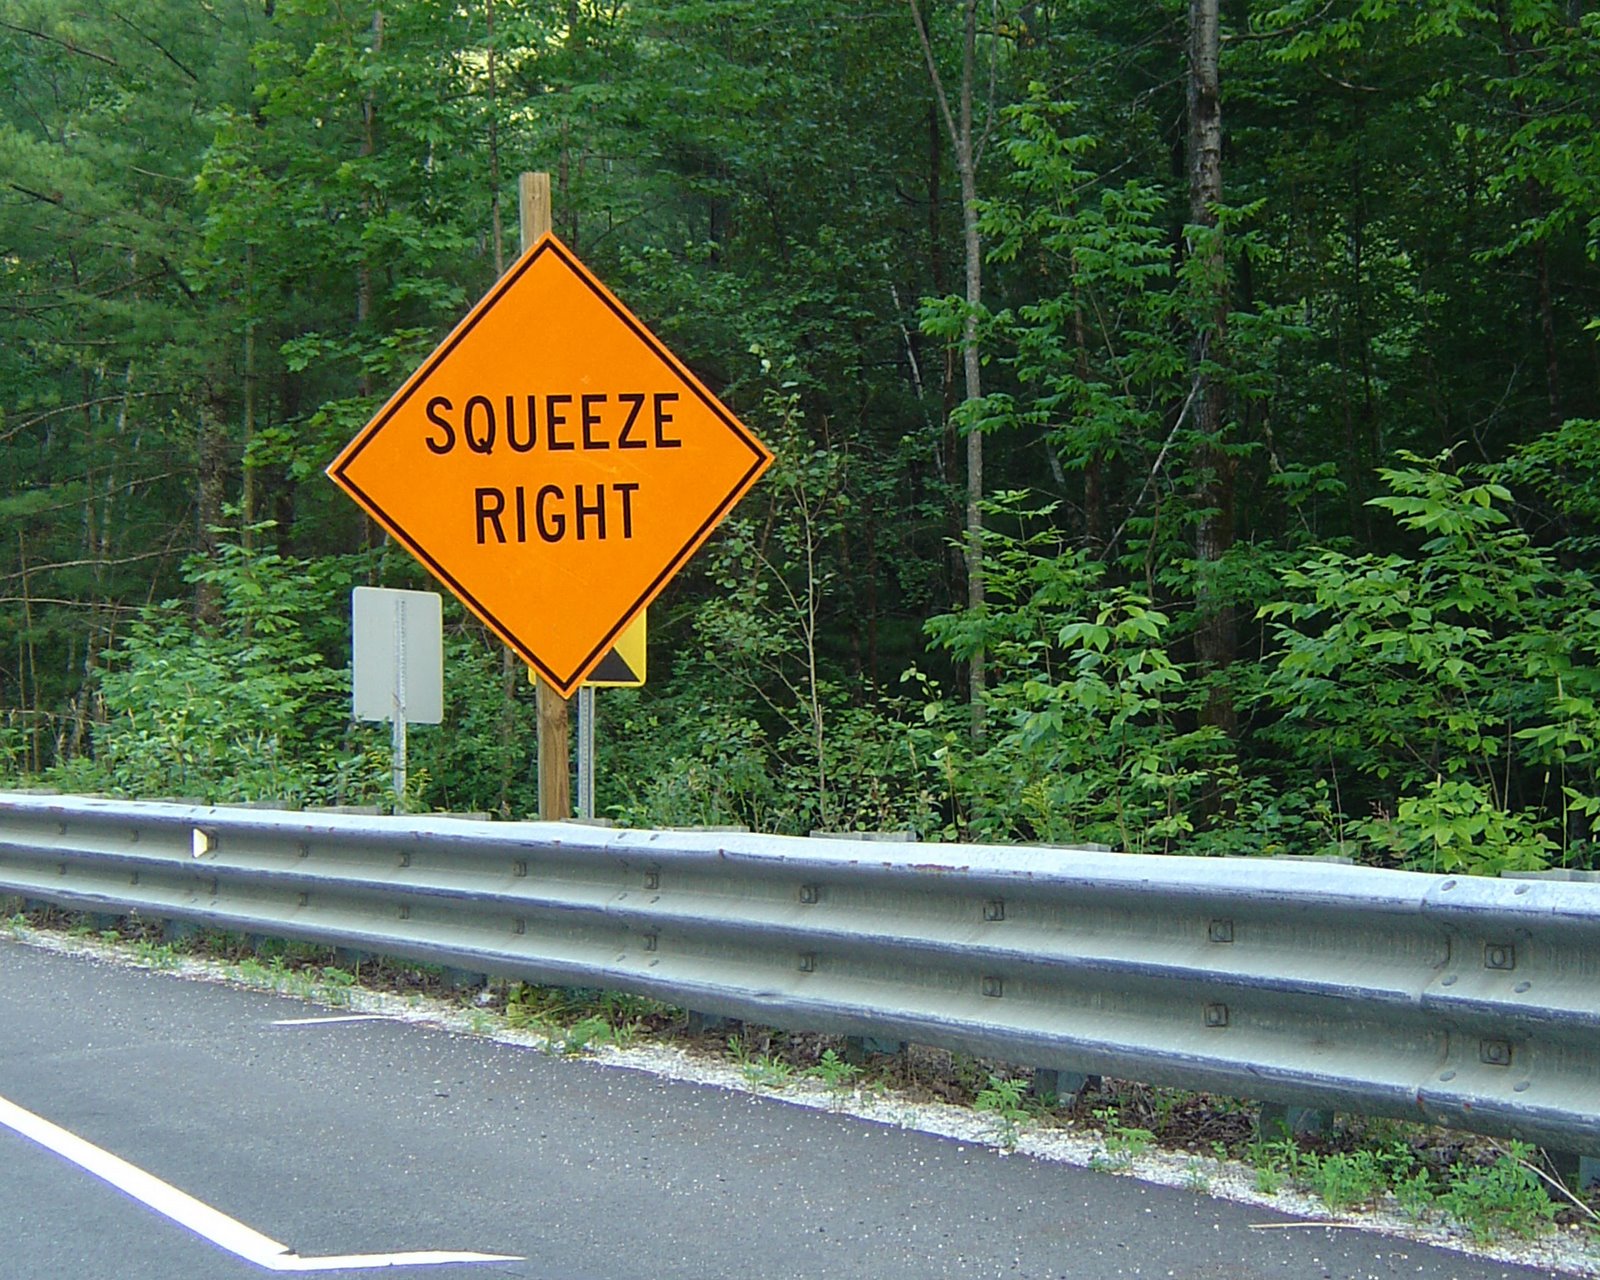 [squeeze+right.jpg]